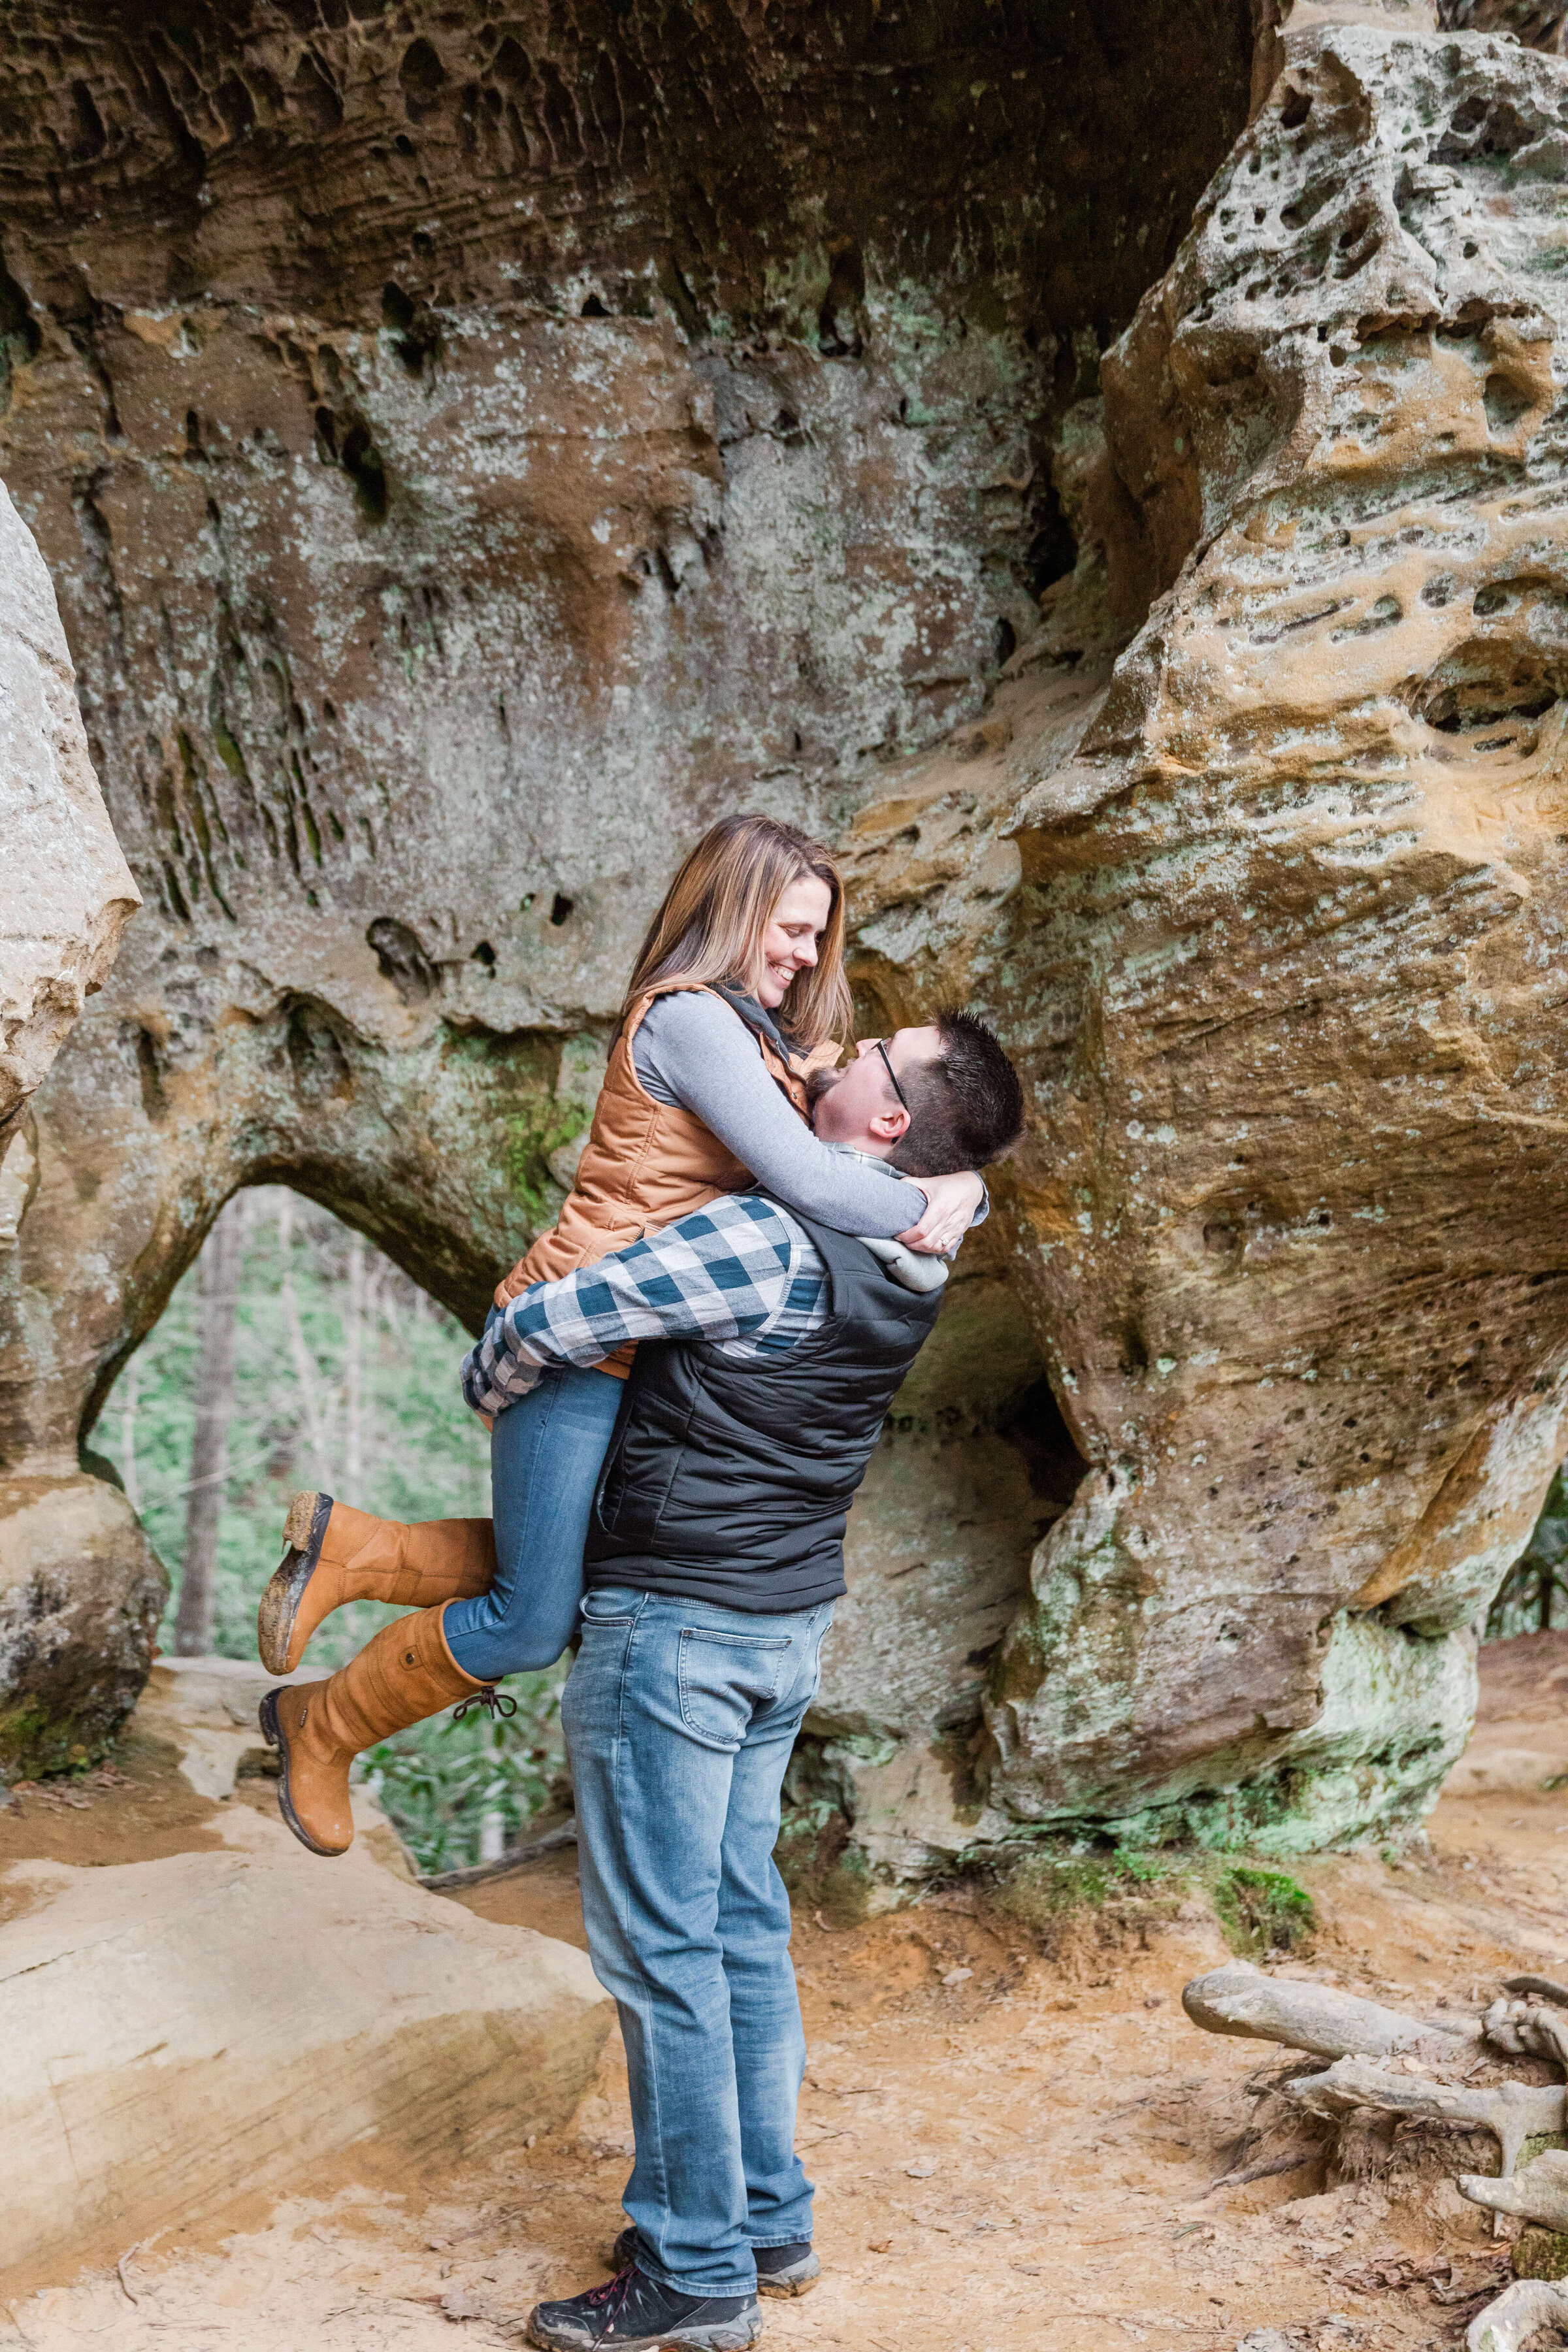 A man holds picks a woman up as they playfully laugh with one another. They are in a gorge on a hiking trail